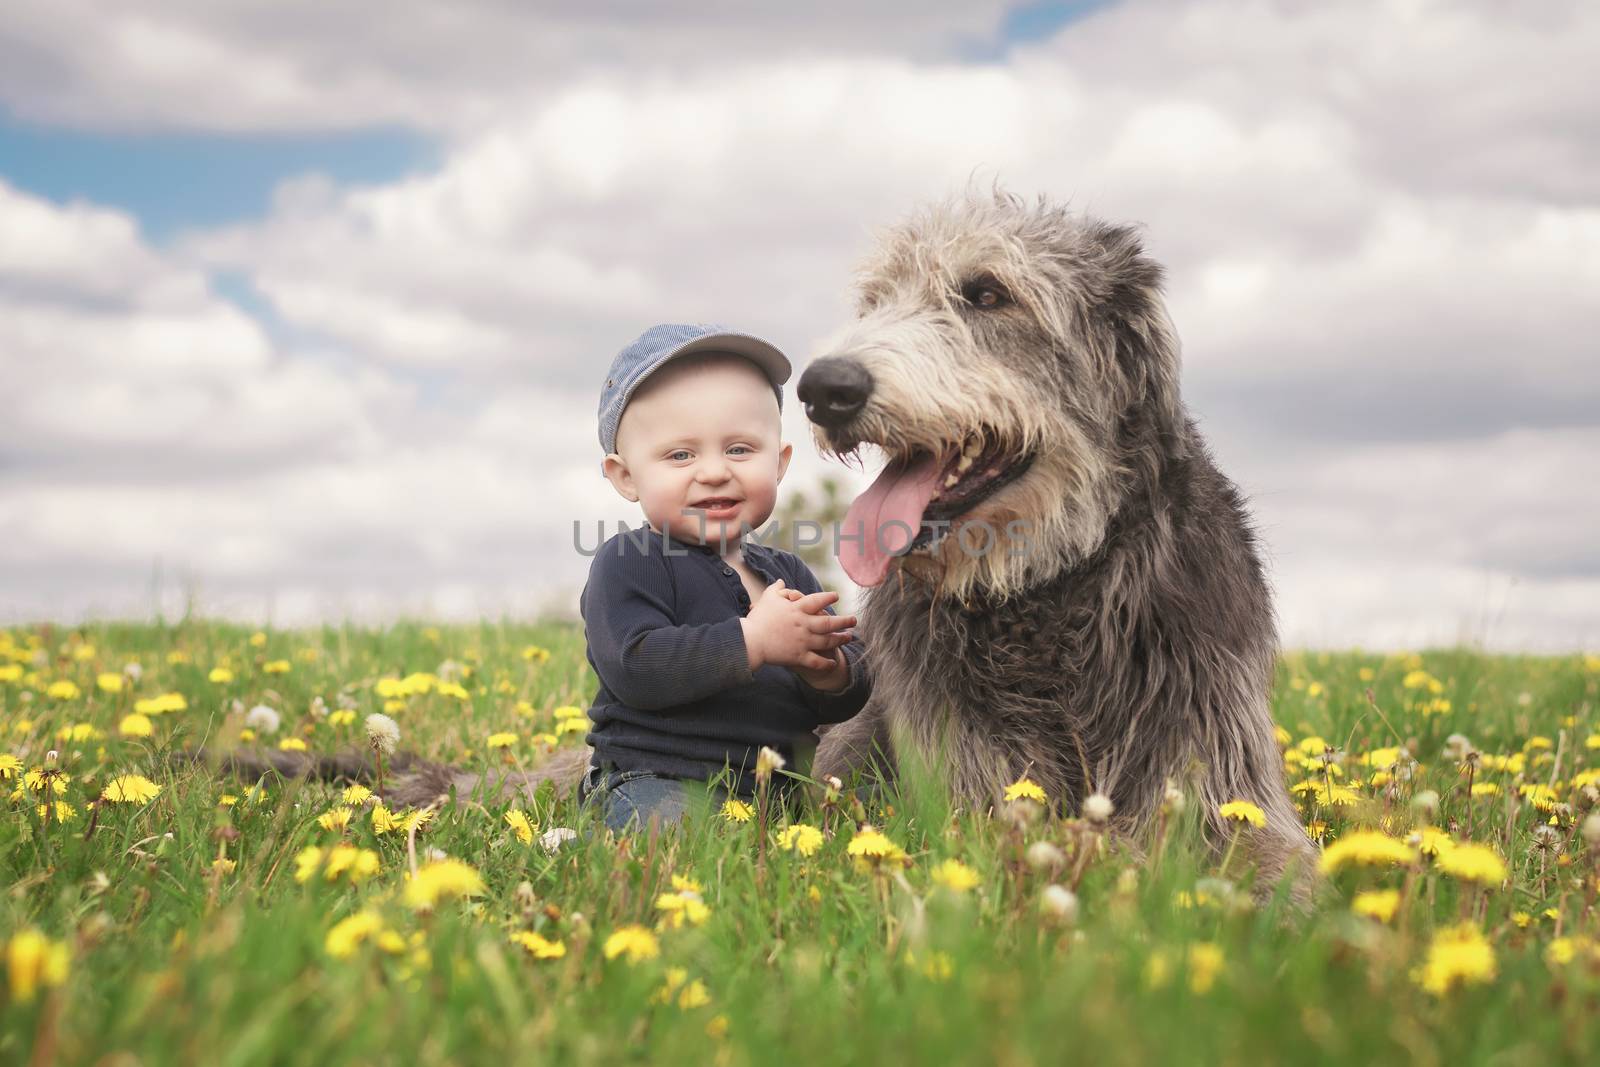 A little Caucasian baby boy in a baseball cap sits next to his big Irish wolfhound friend in a meadow full of blooming dandelions with a cloudy sky in the background.